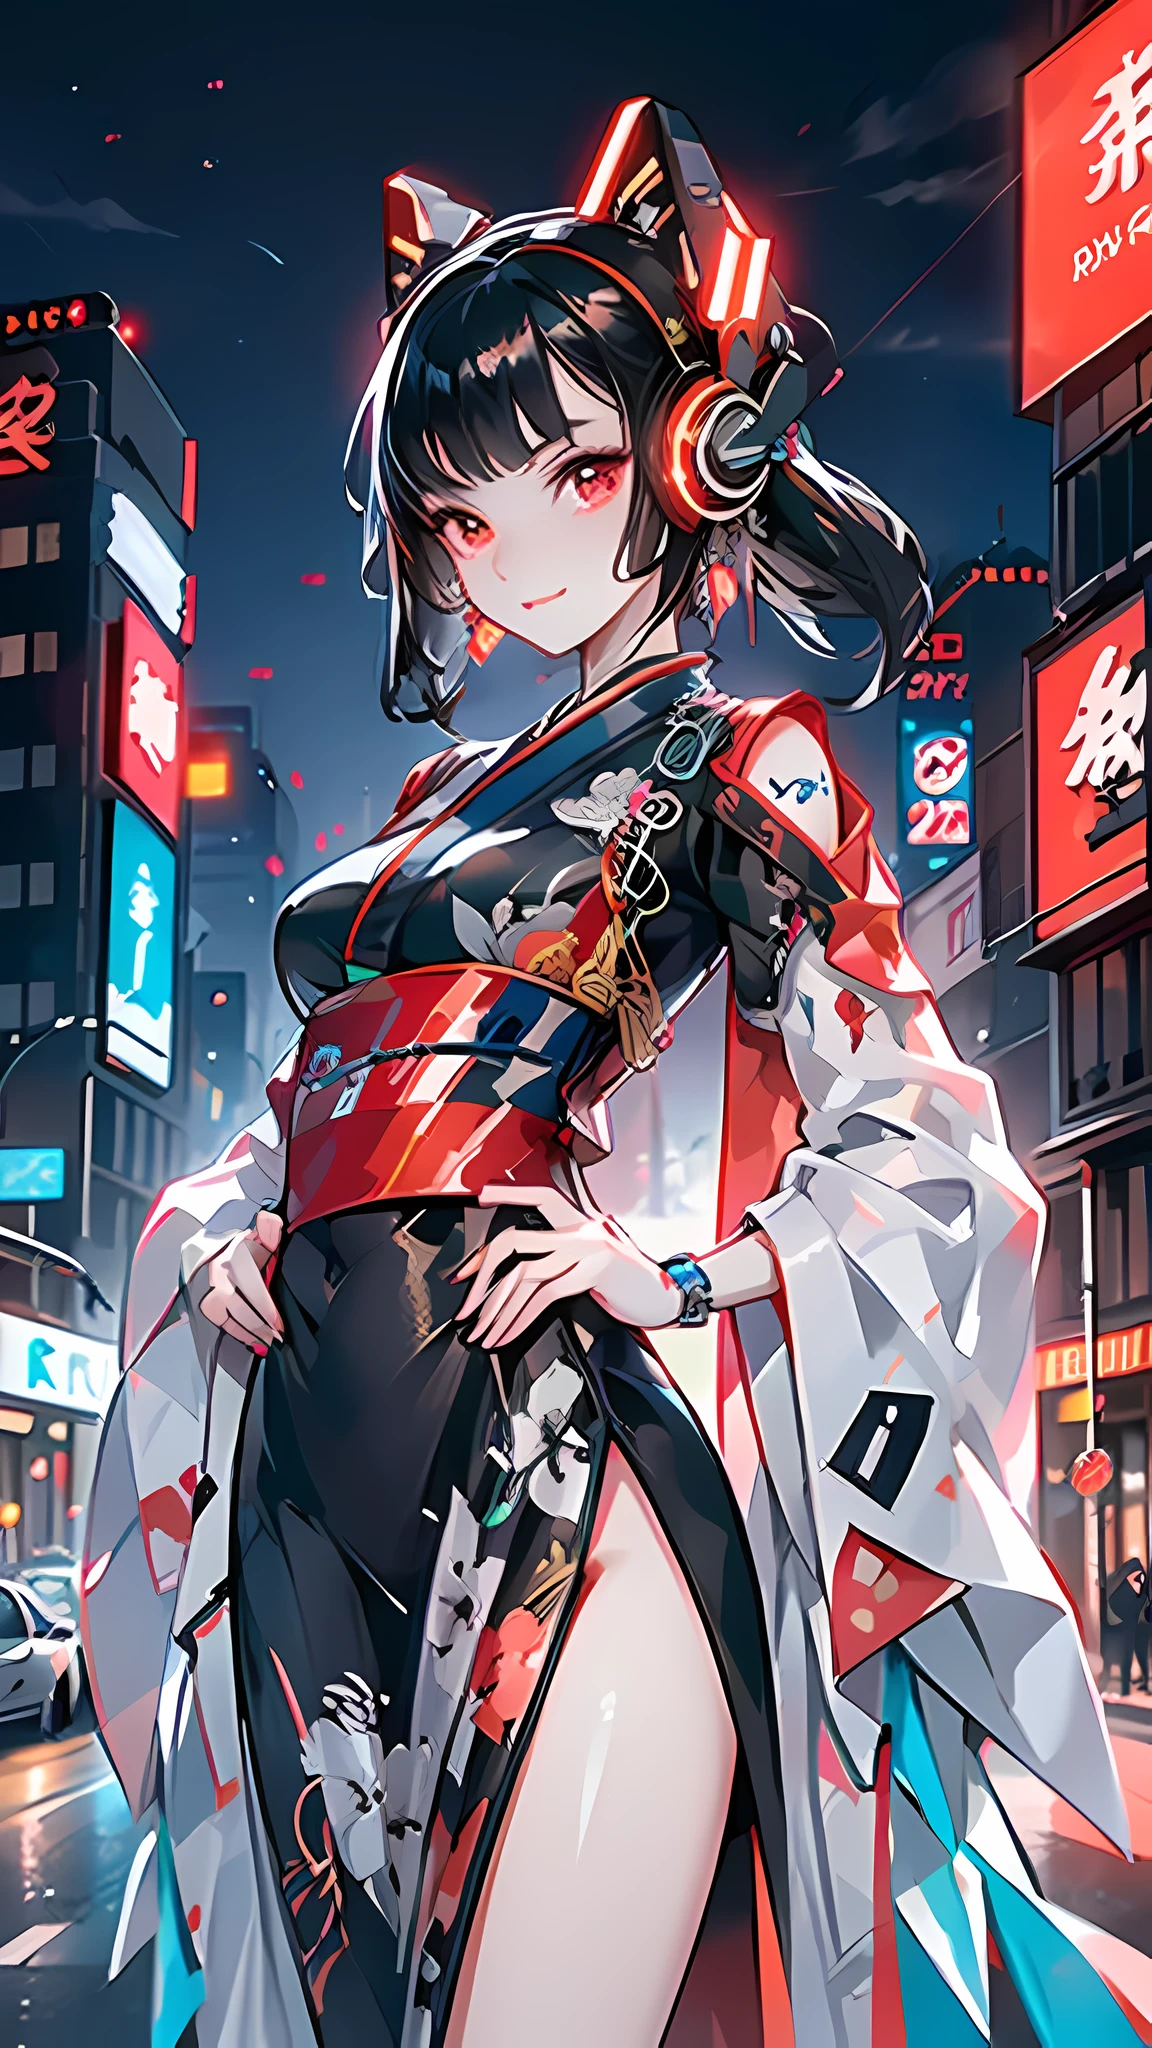 (masterpiece), best quality, expressive eyes, perfect face,1 girl, japanese clothes, liquid silver and red, kimono, cyberpunk city, dynamic pose, glowing headphones, glowing hair accessories, long hair, glowing earrings, glowing necklace, cyberpunk, high-tech city, full of mechanical and futuristic elements, futuristic, technology, glowing neon, red, red light, transparent tulle, transparent streamers, laser, digital background urban sky, big moon, with vehicles, best quality, masterpiece, 8K, character edge light, Super high detail, high quality, the most beautiful woman in human beings, smiling slightly, face facing front and left and right symmetry, ear decoration, beautiful pupil light effects, visual data, (black hair), hair is not messy, long hair over the waist, luminous electronic watch, deep eyes, happy, English doodling